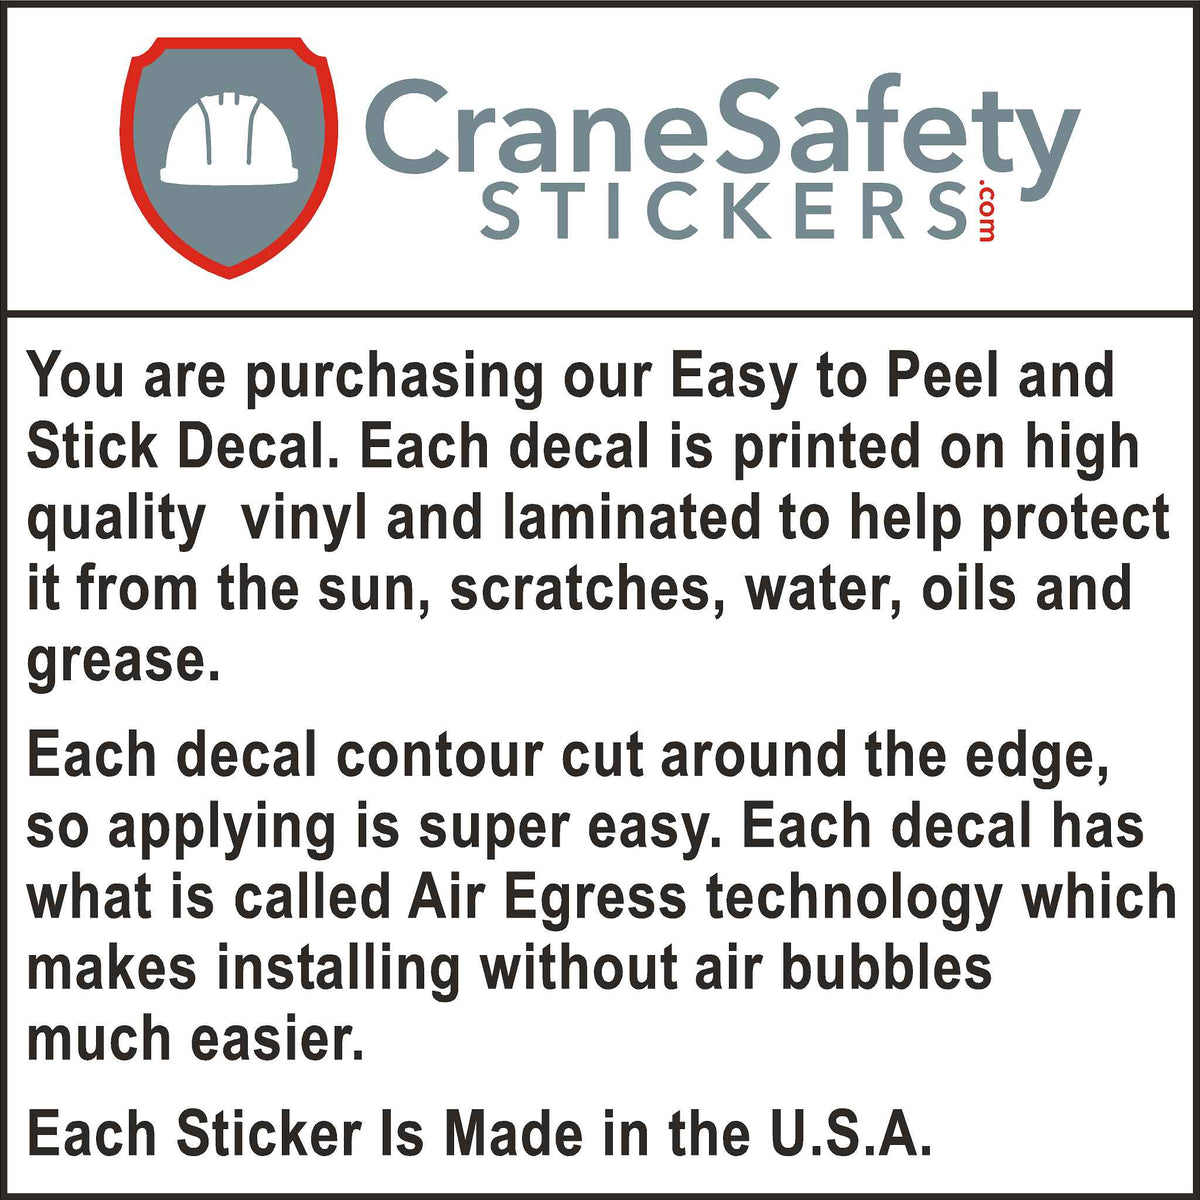 Quality of Our Pinch Point Decals for Crane Safety.